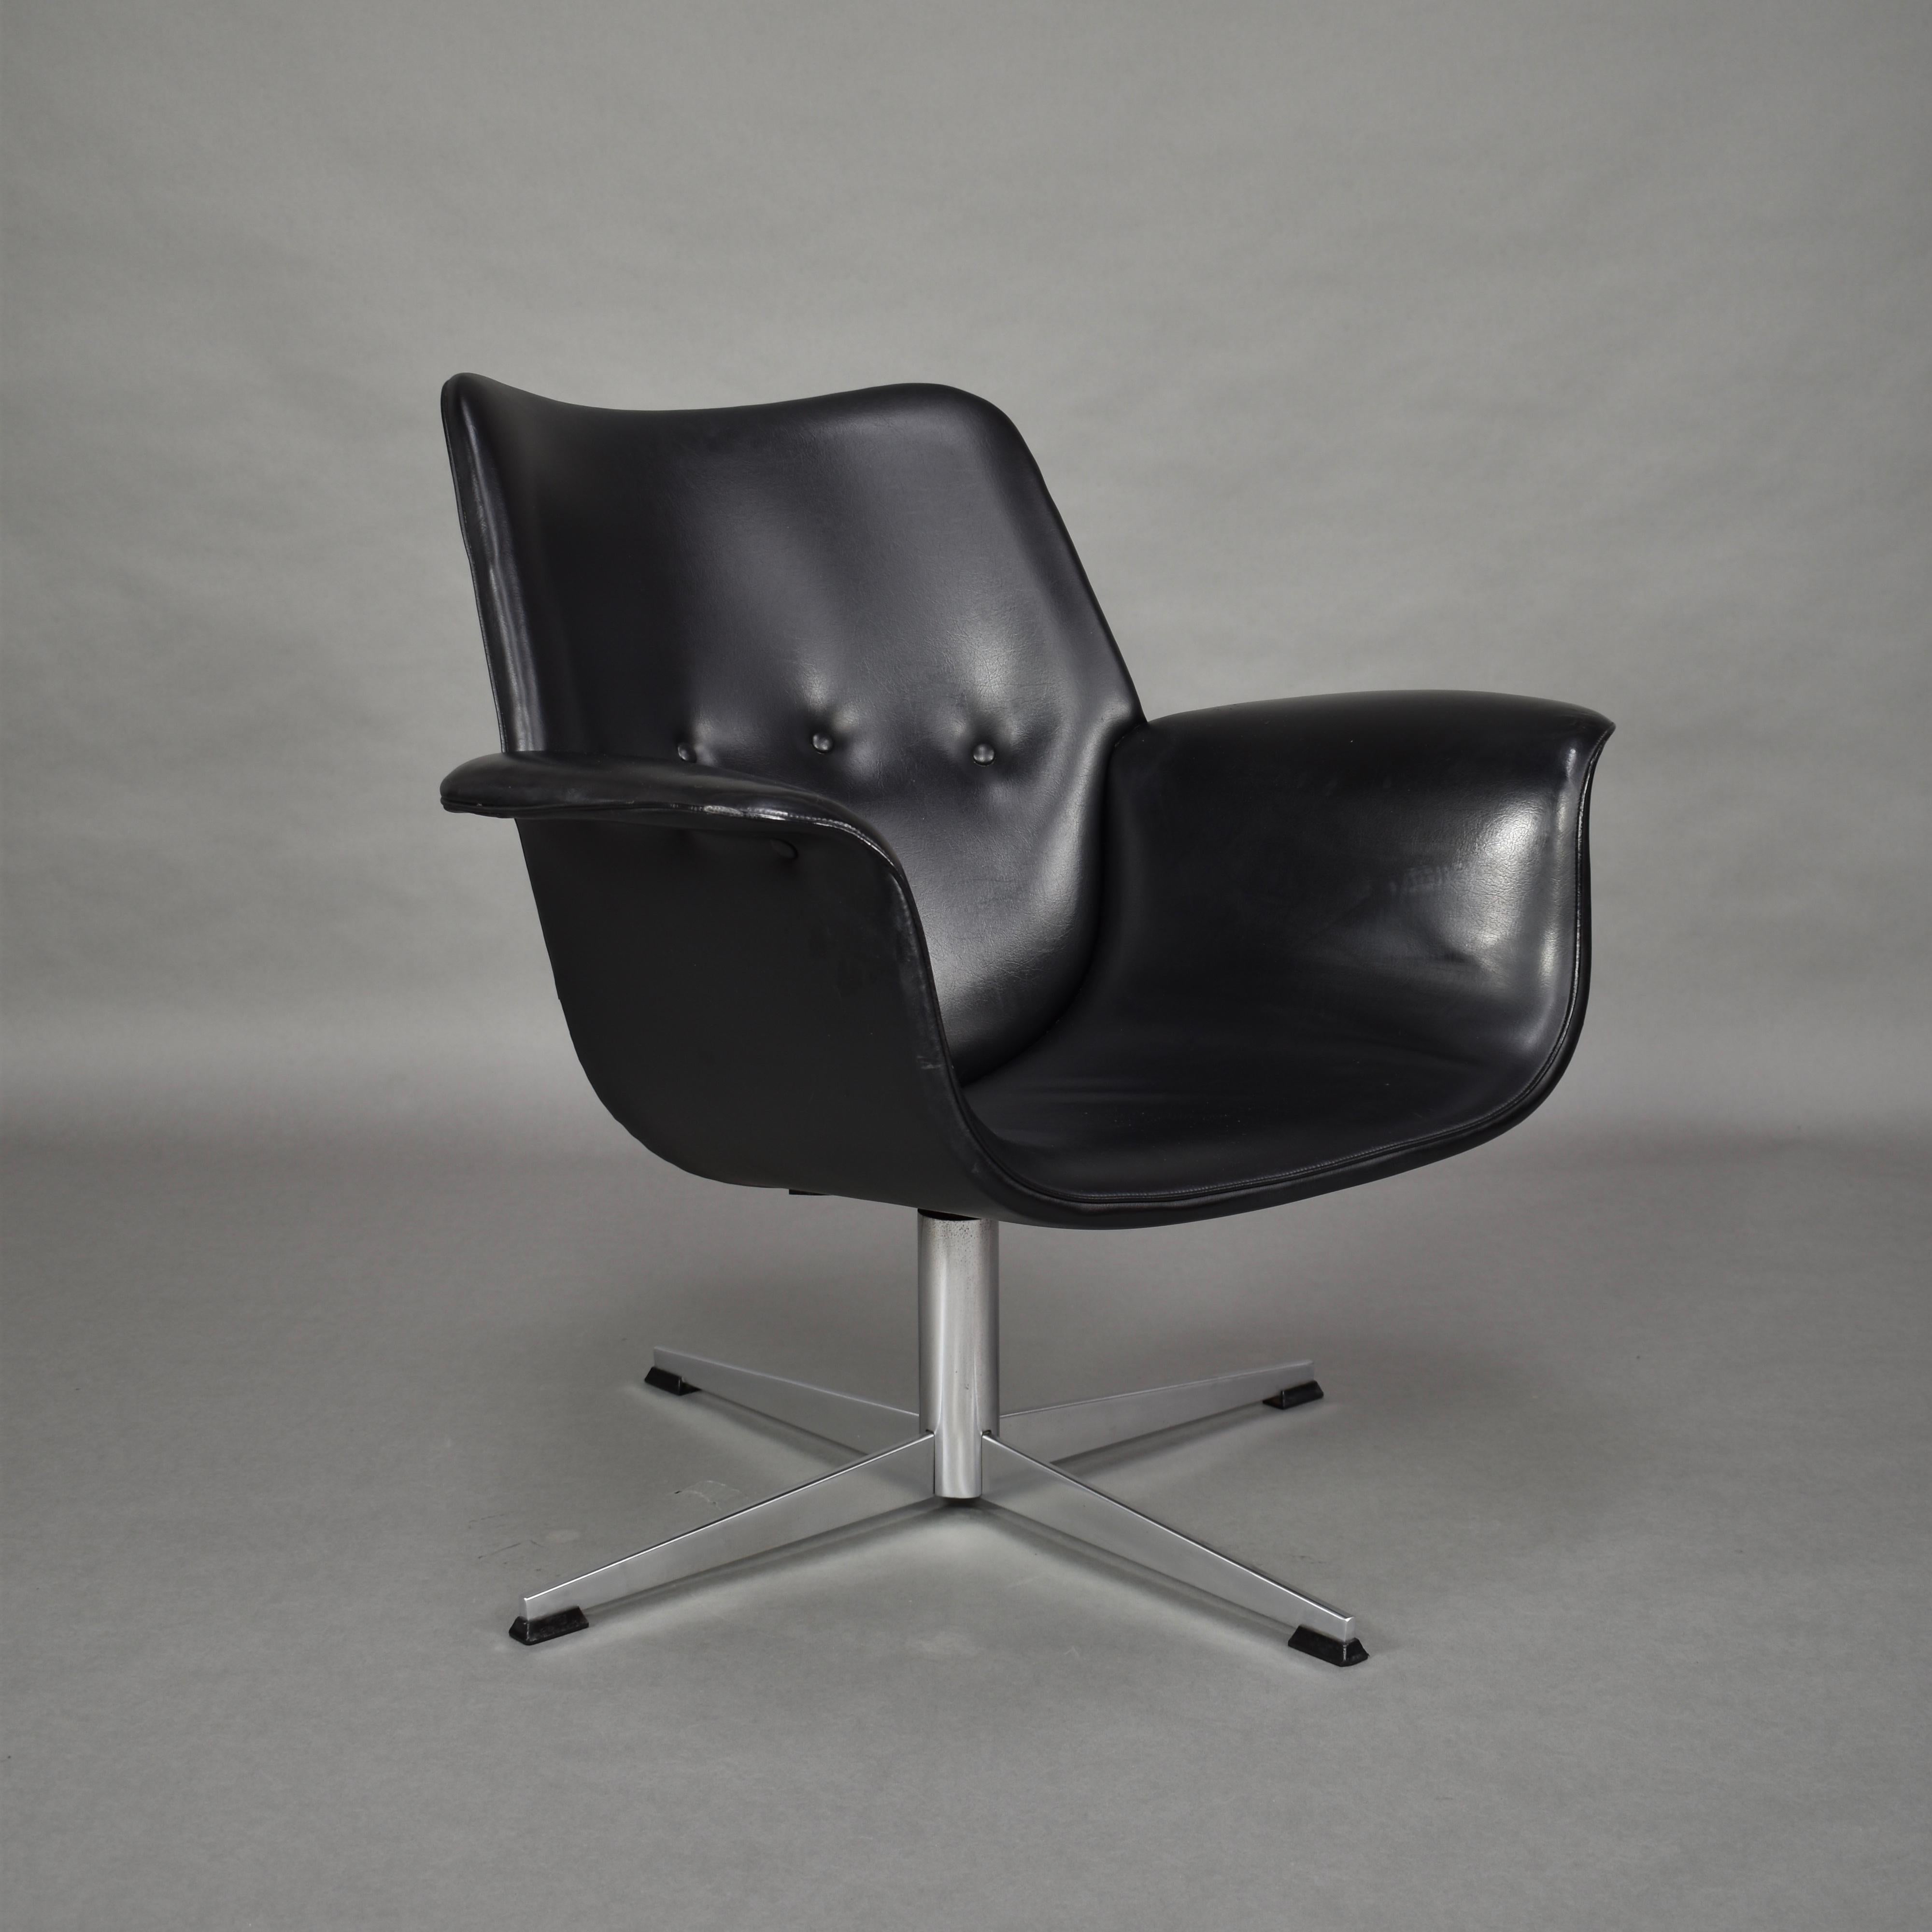 Faux Leather Executive Swivel Lounge Armchair by Topform, Netherlands, circa 1950